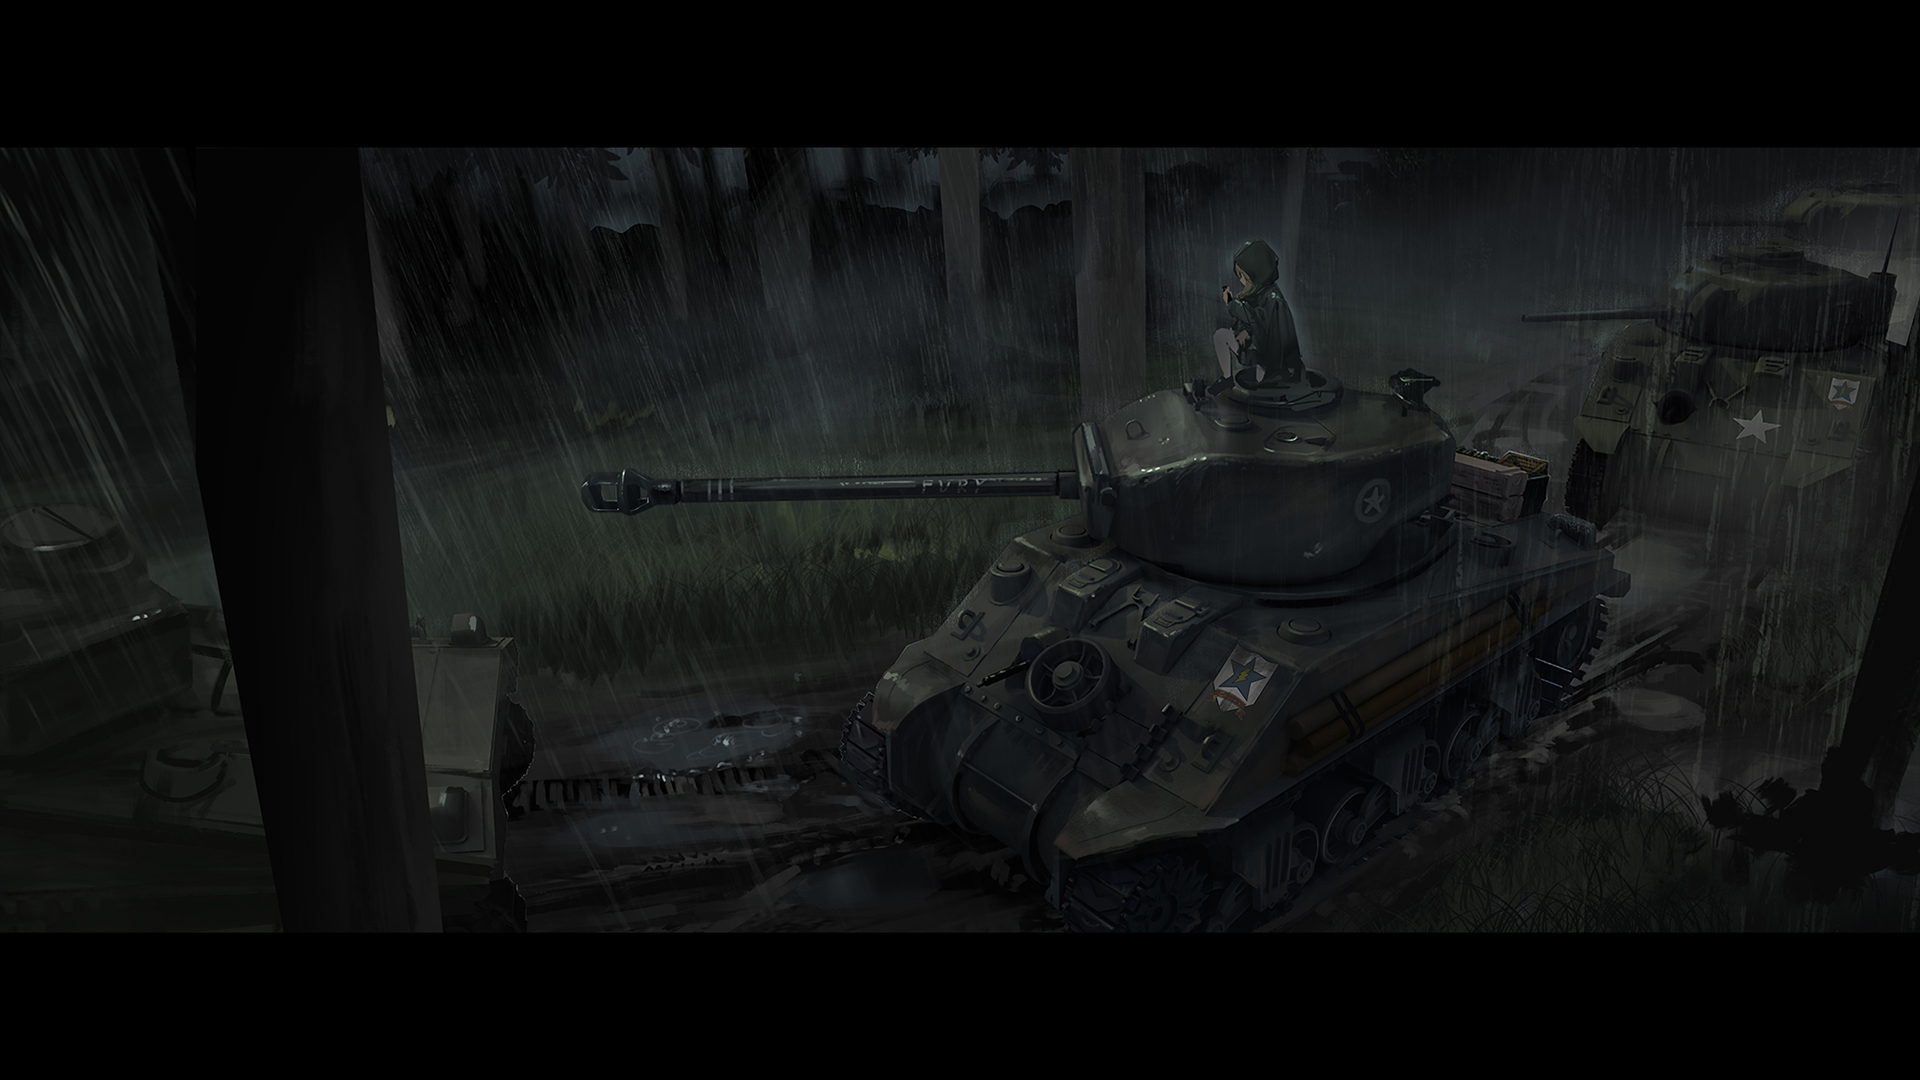 444 Girls Und Panzer Hd Wallpapers Background Images Wallpaper Images, Photos, Reviews